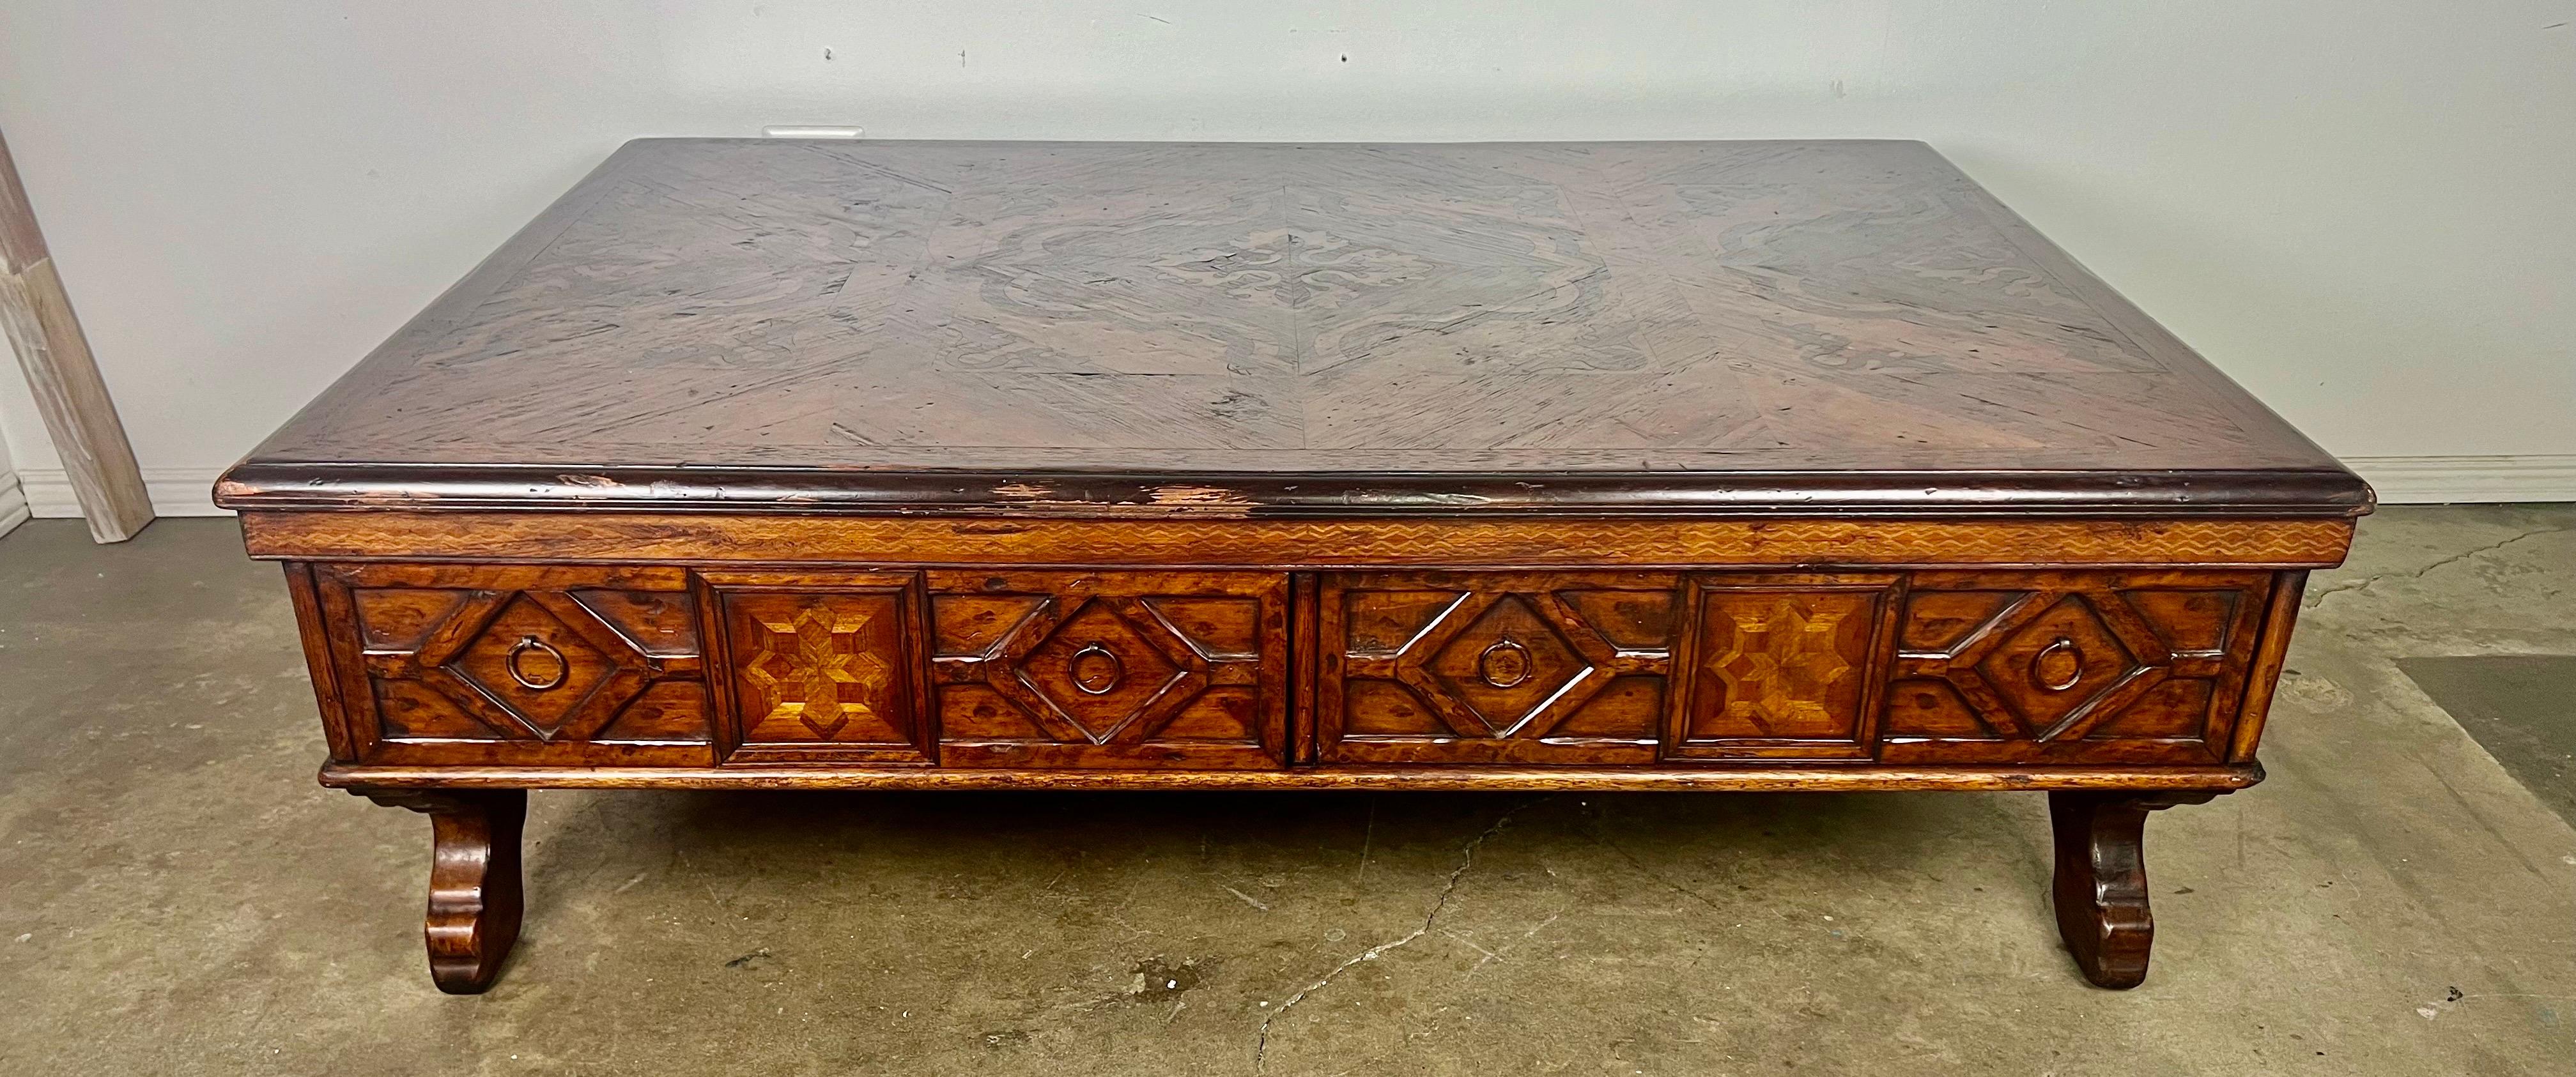 Baroque Monumental Spanish Inlaid Coffee Table w/ Drawers For Sale